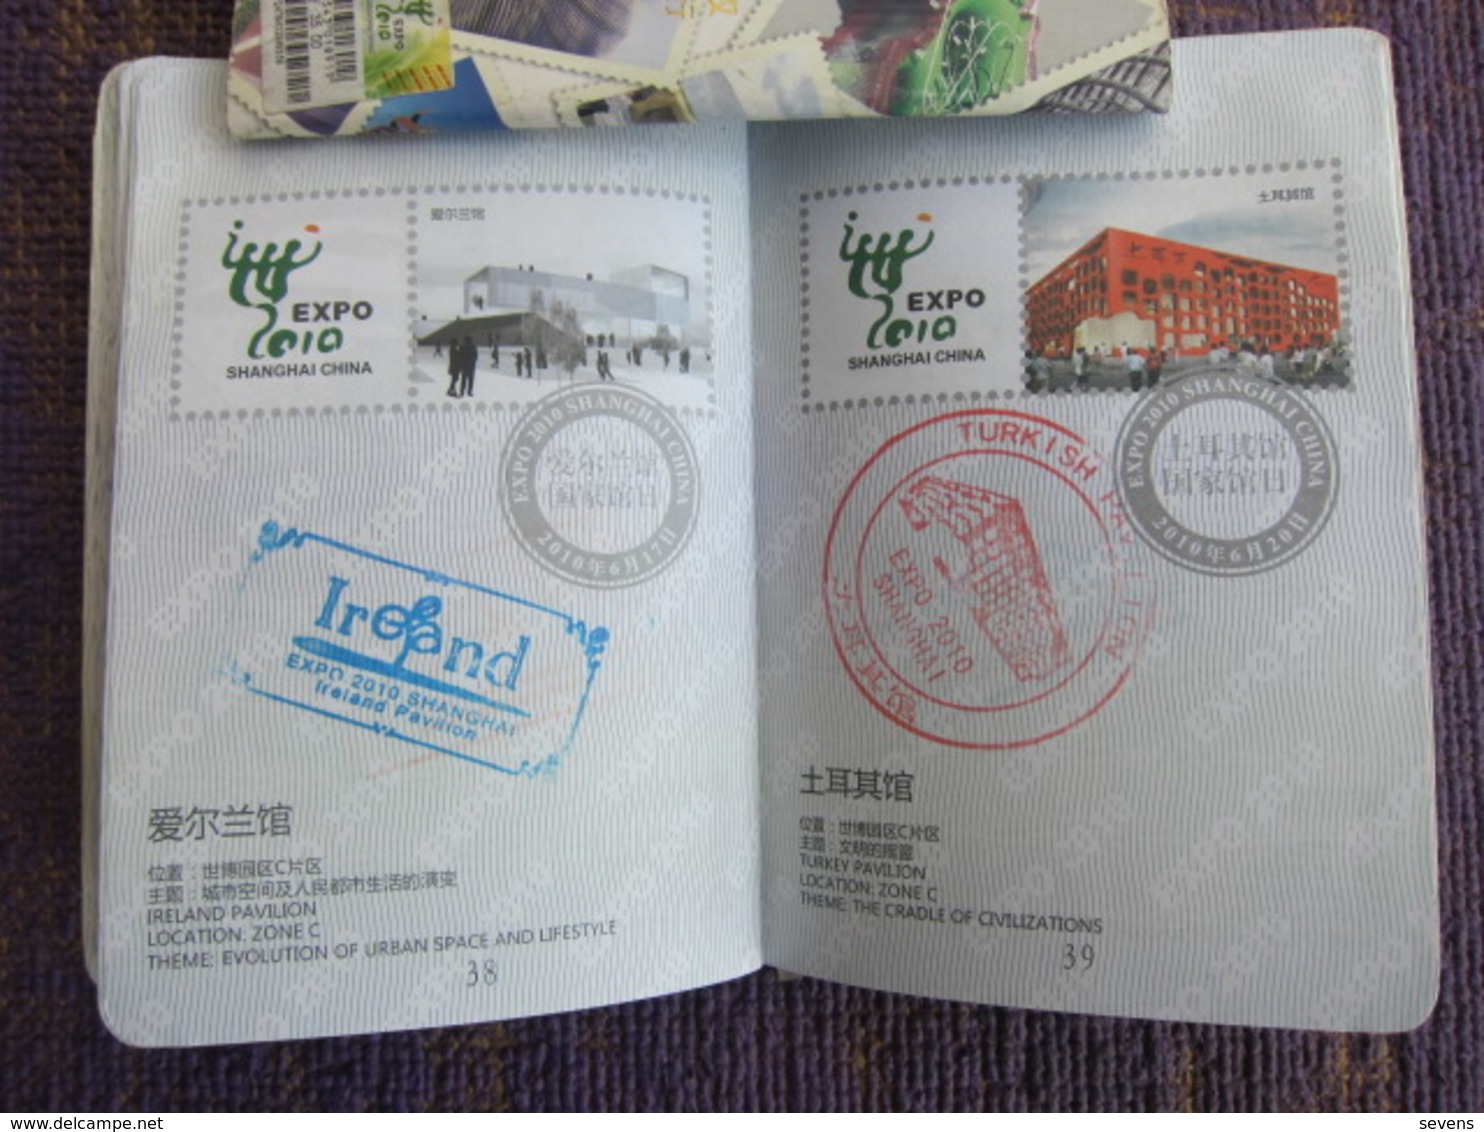 Shanghai 2010EXPO,passport with seals of 56 Pavilions,national and theme